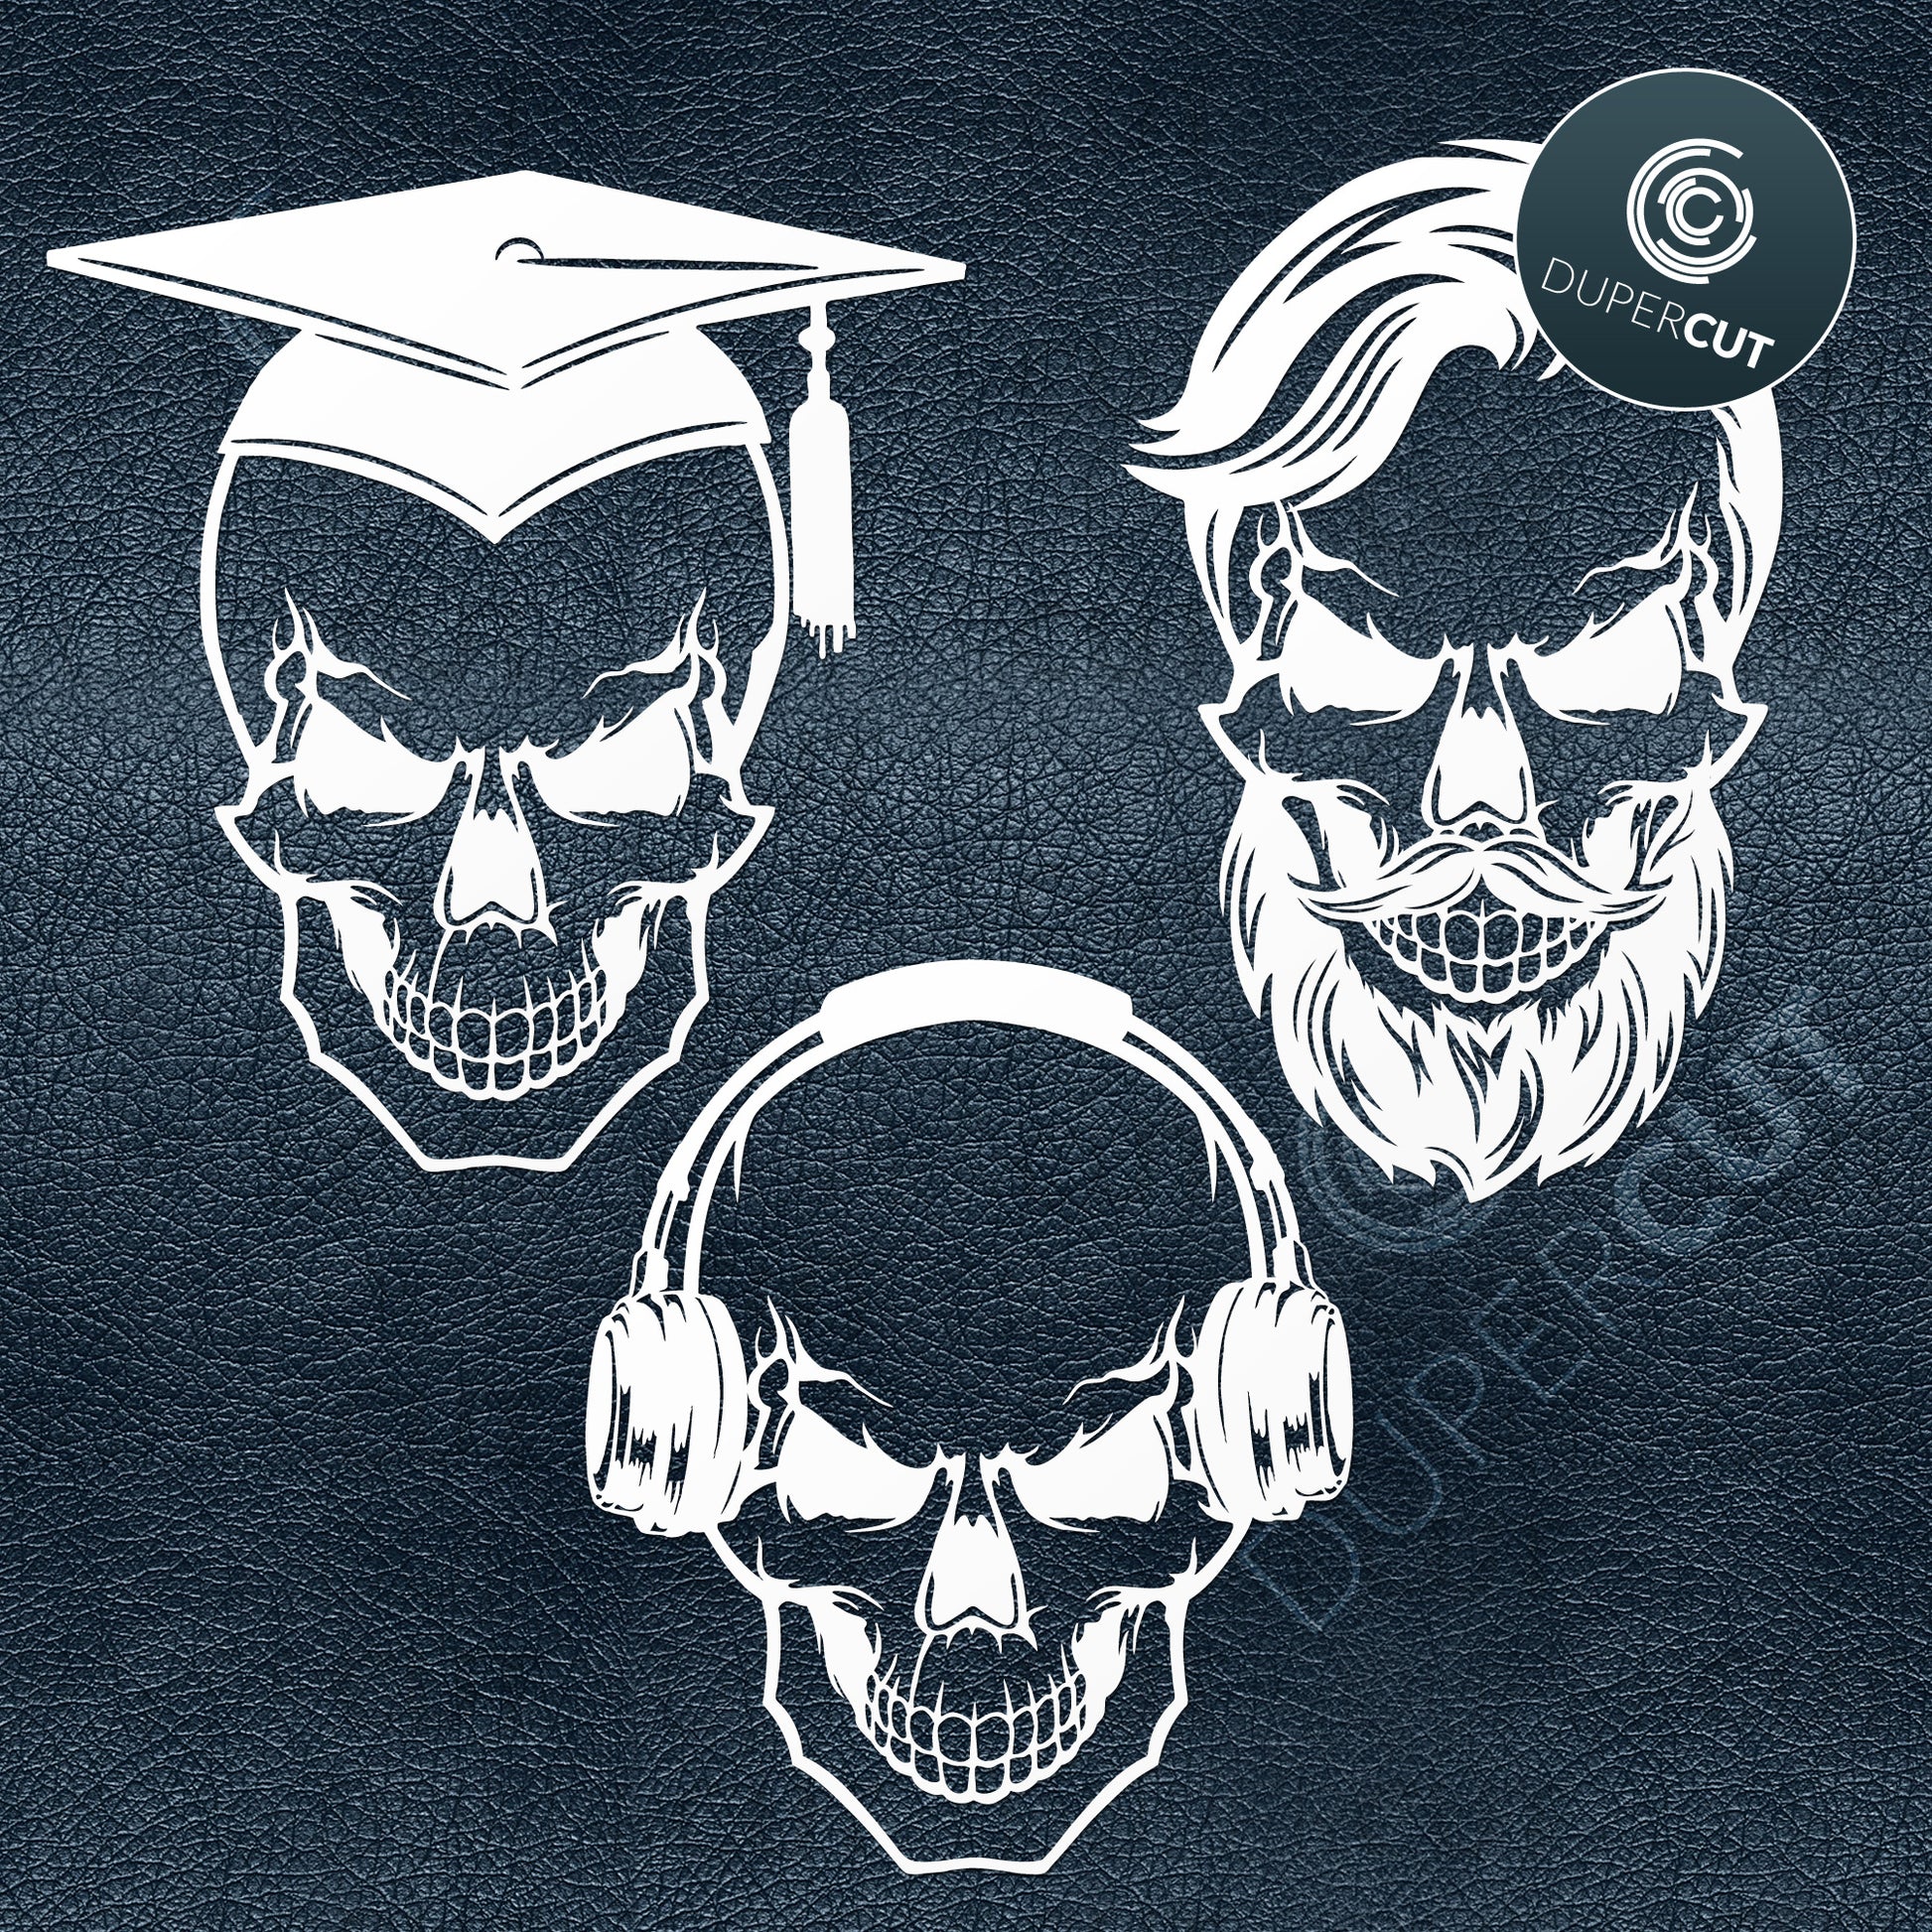 Skull faces, headphones, graduation, steampunk design. SVG PNG DXF cutting files for Cricut, Silhouette, Glowforge, print on demand, sublimation templates